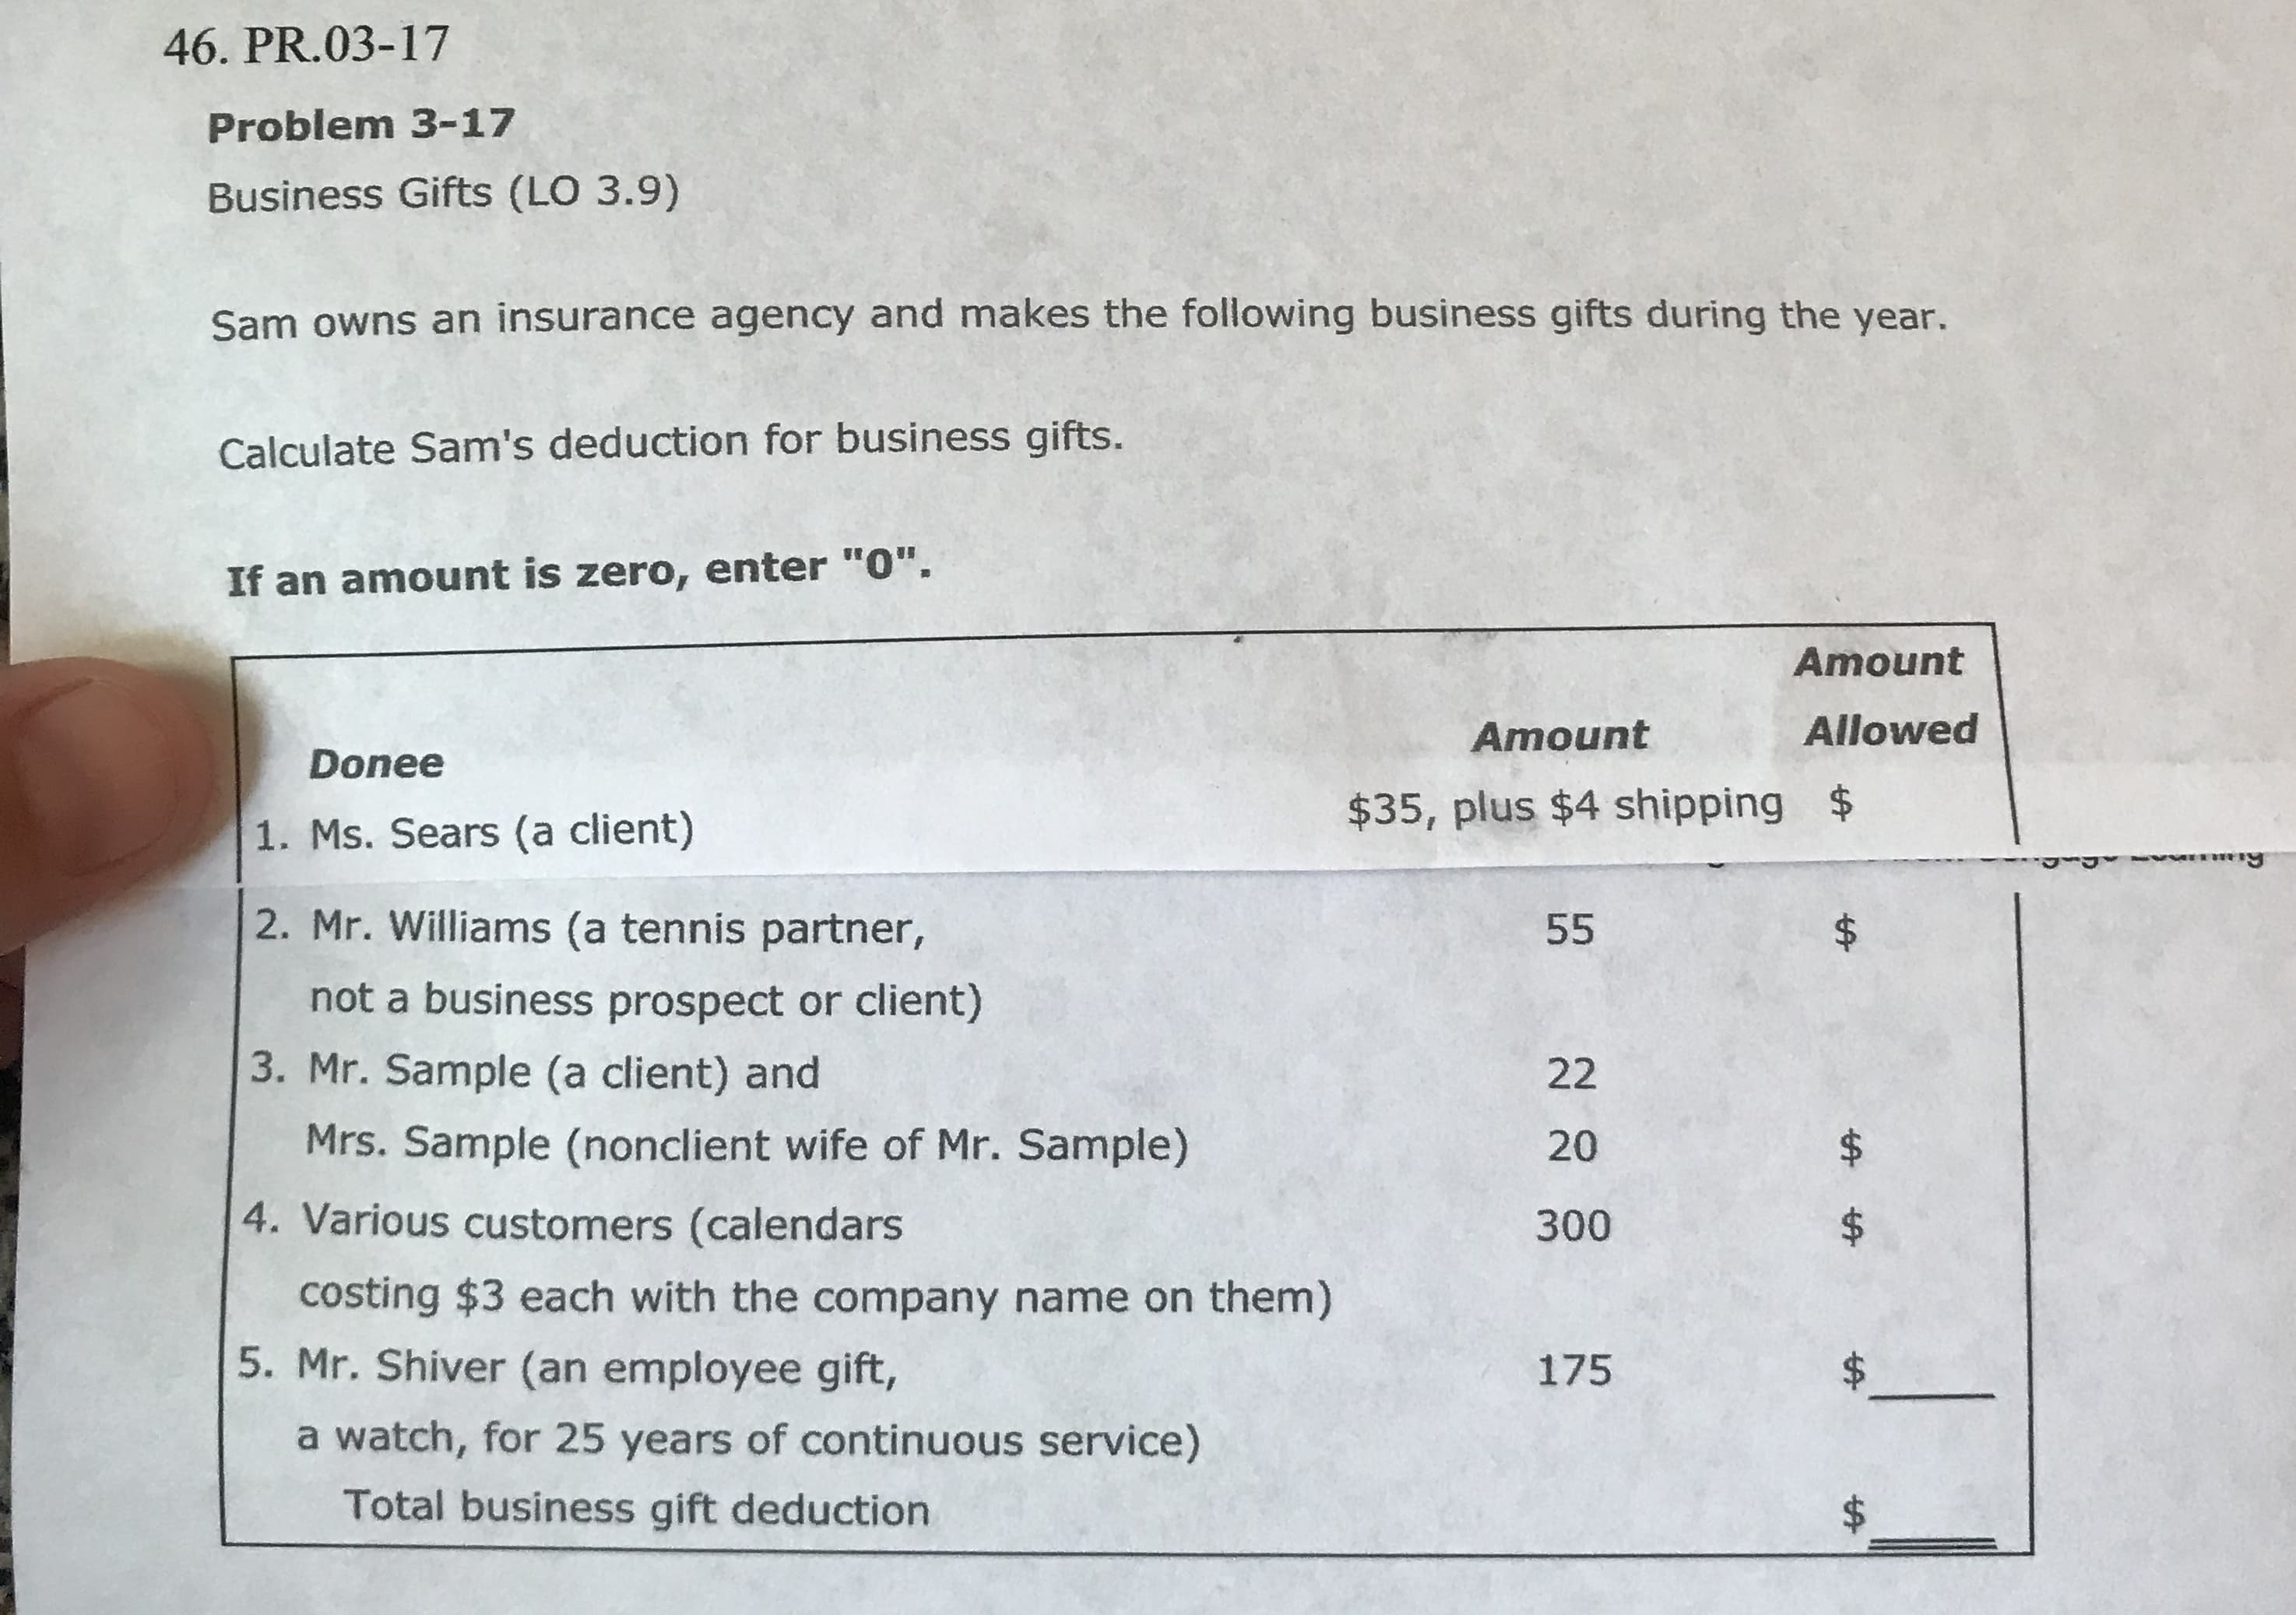 46. PR.03-17
Problem 3-17
Business Gifts (LO 3.9)
Sam owns an insurance agency and makes the following business gifts during the year.
Calculate Sam's deduction for business gifts.
If an amount is zero, enter "0".
Amount
Allowed
Amount
Donee
$35, plus $4 shipping $
1. Ms. Sears (a client)
y
2. Mr. Williams (a tennis partner,
55
not a business prospect or client)
3. Mr. Sample (a client) and
22
Mrs. Sample (nonclient wife of Mr. Sample)
$
20
4. Various customers (calendars
300
costing $3 each with the company name on them)
5. Mr. Shiver (an employee gift,
175
a watch, for 25 years of continuous service)
Total business gift deduction
tf
tfr
tA
LO
